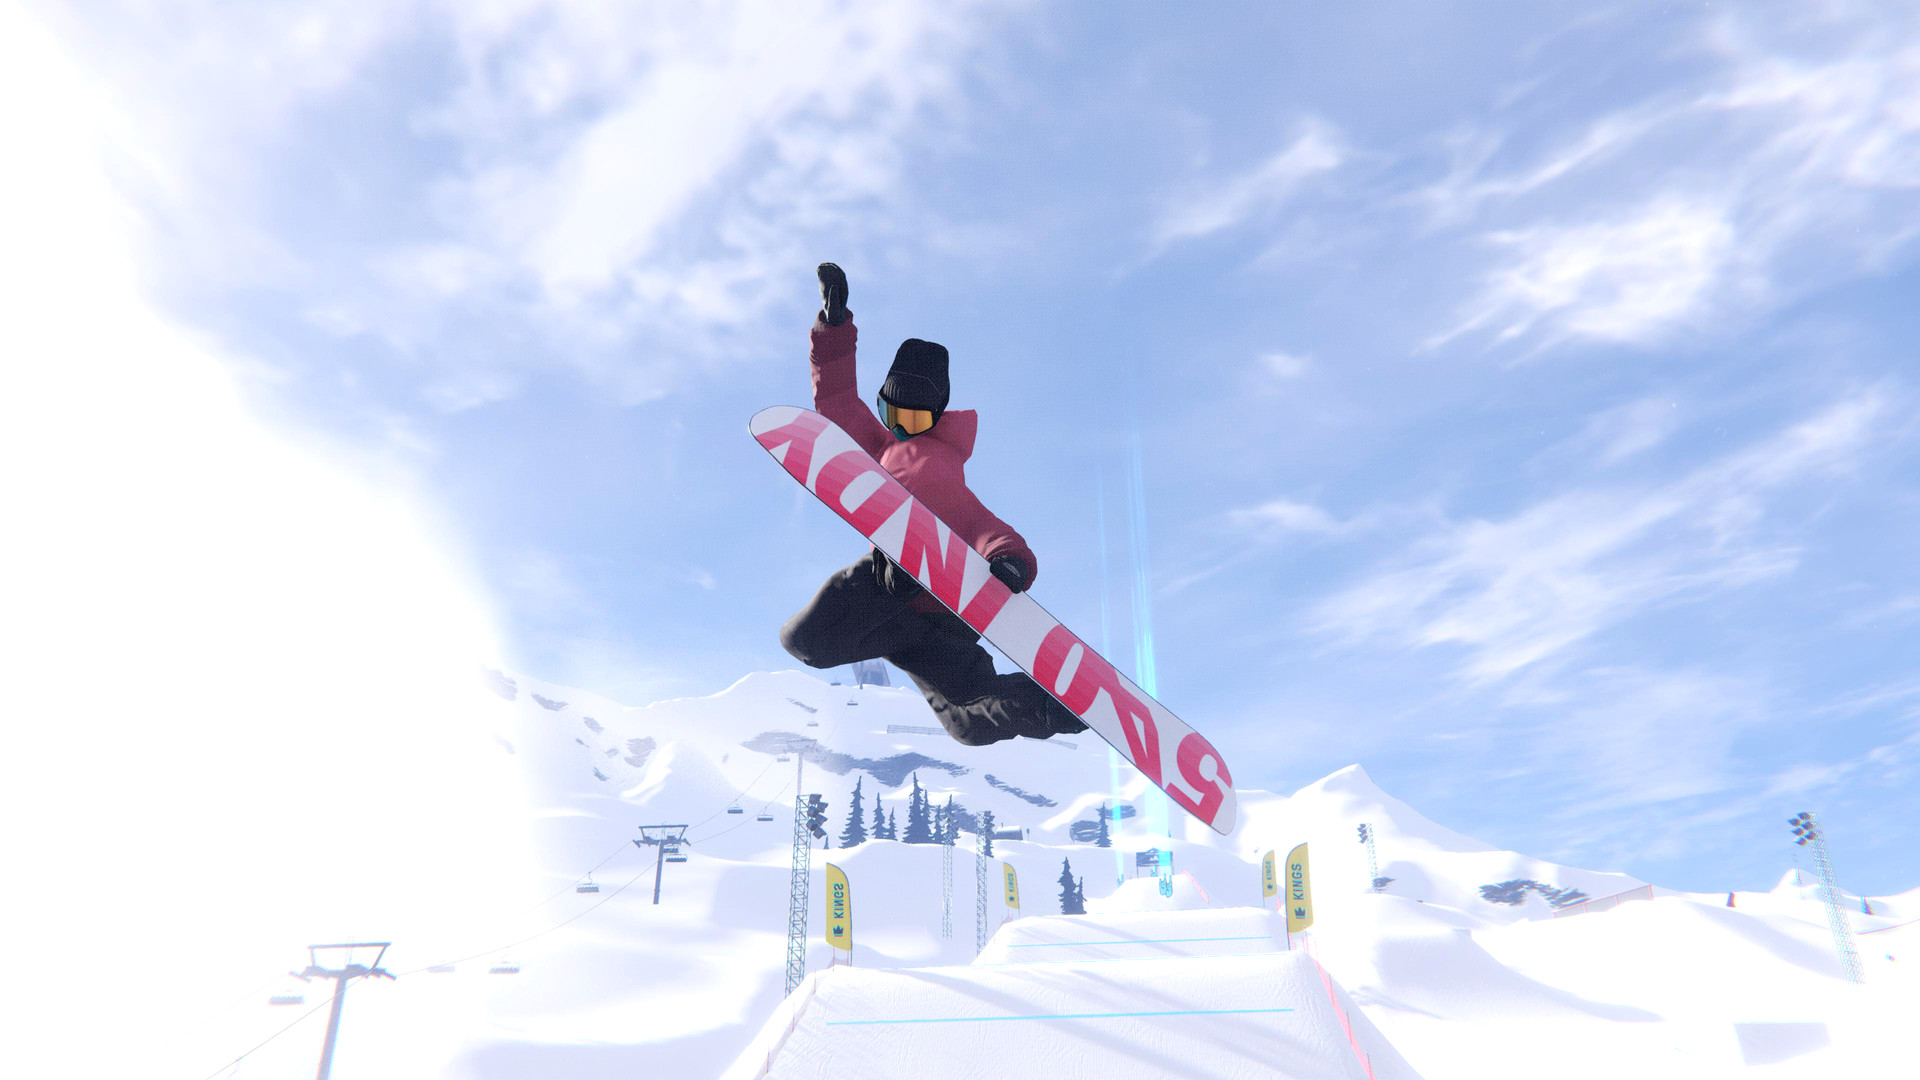 Styling on a snowboard